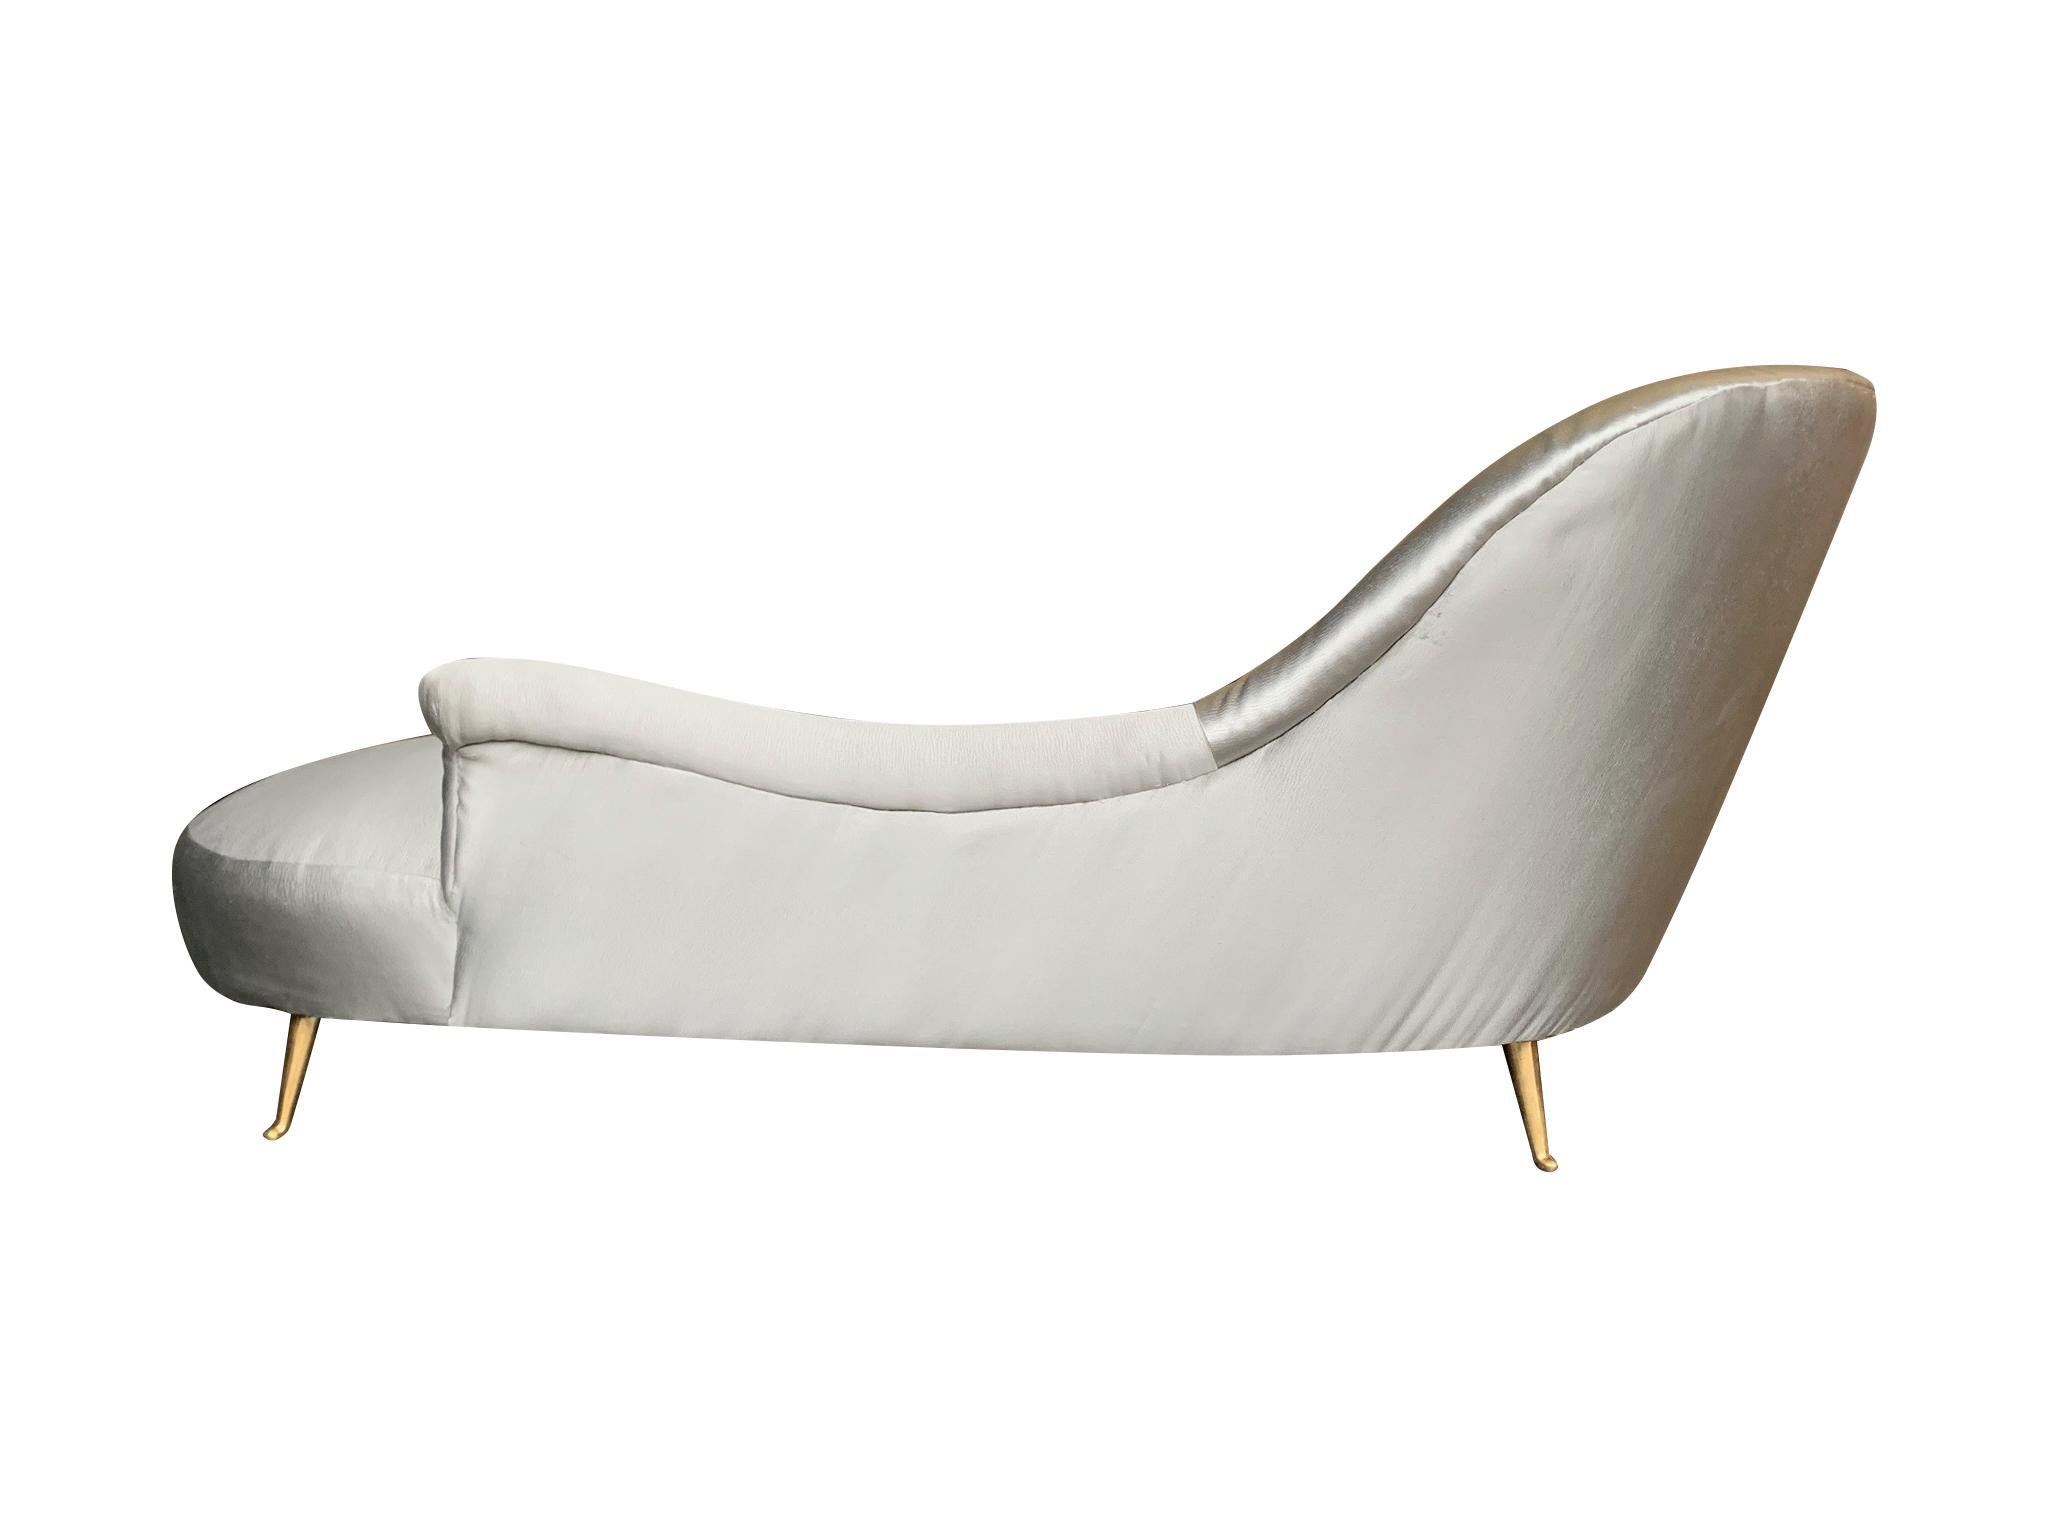 Italian Chaise Longue Upholstered in Champagne Grey Fabric with Brass Feet 2